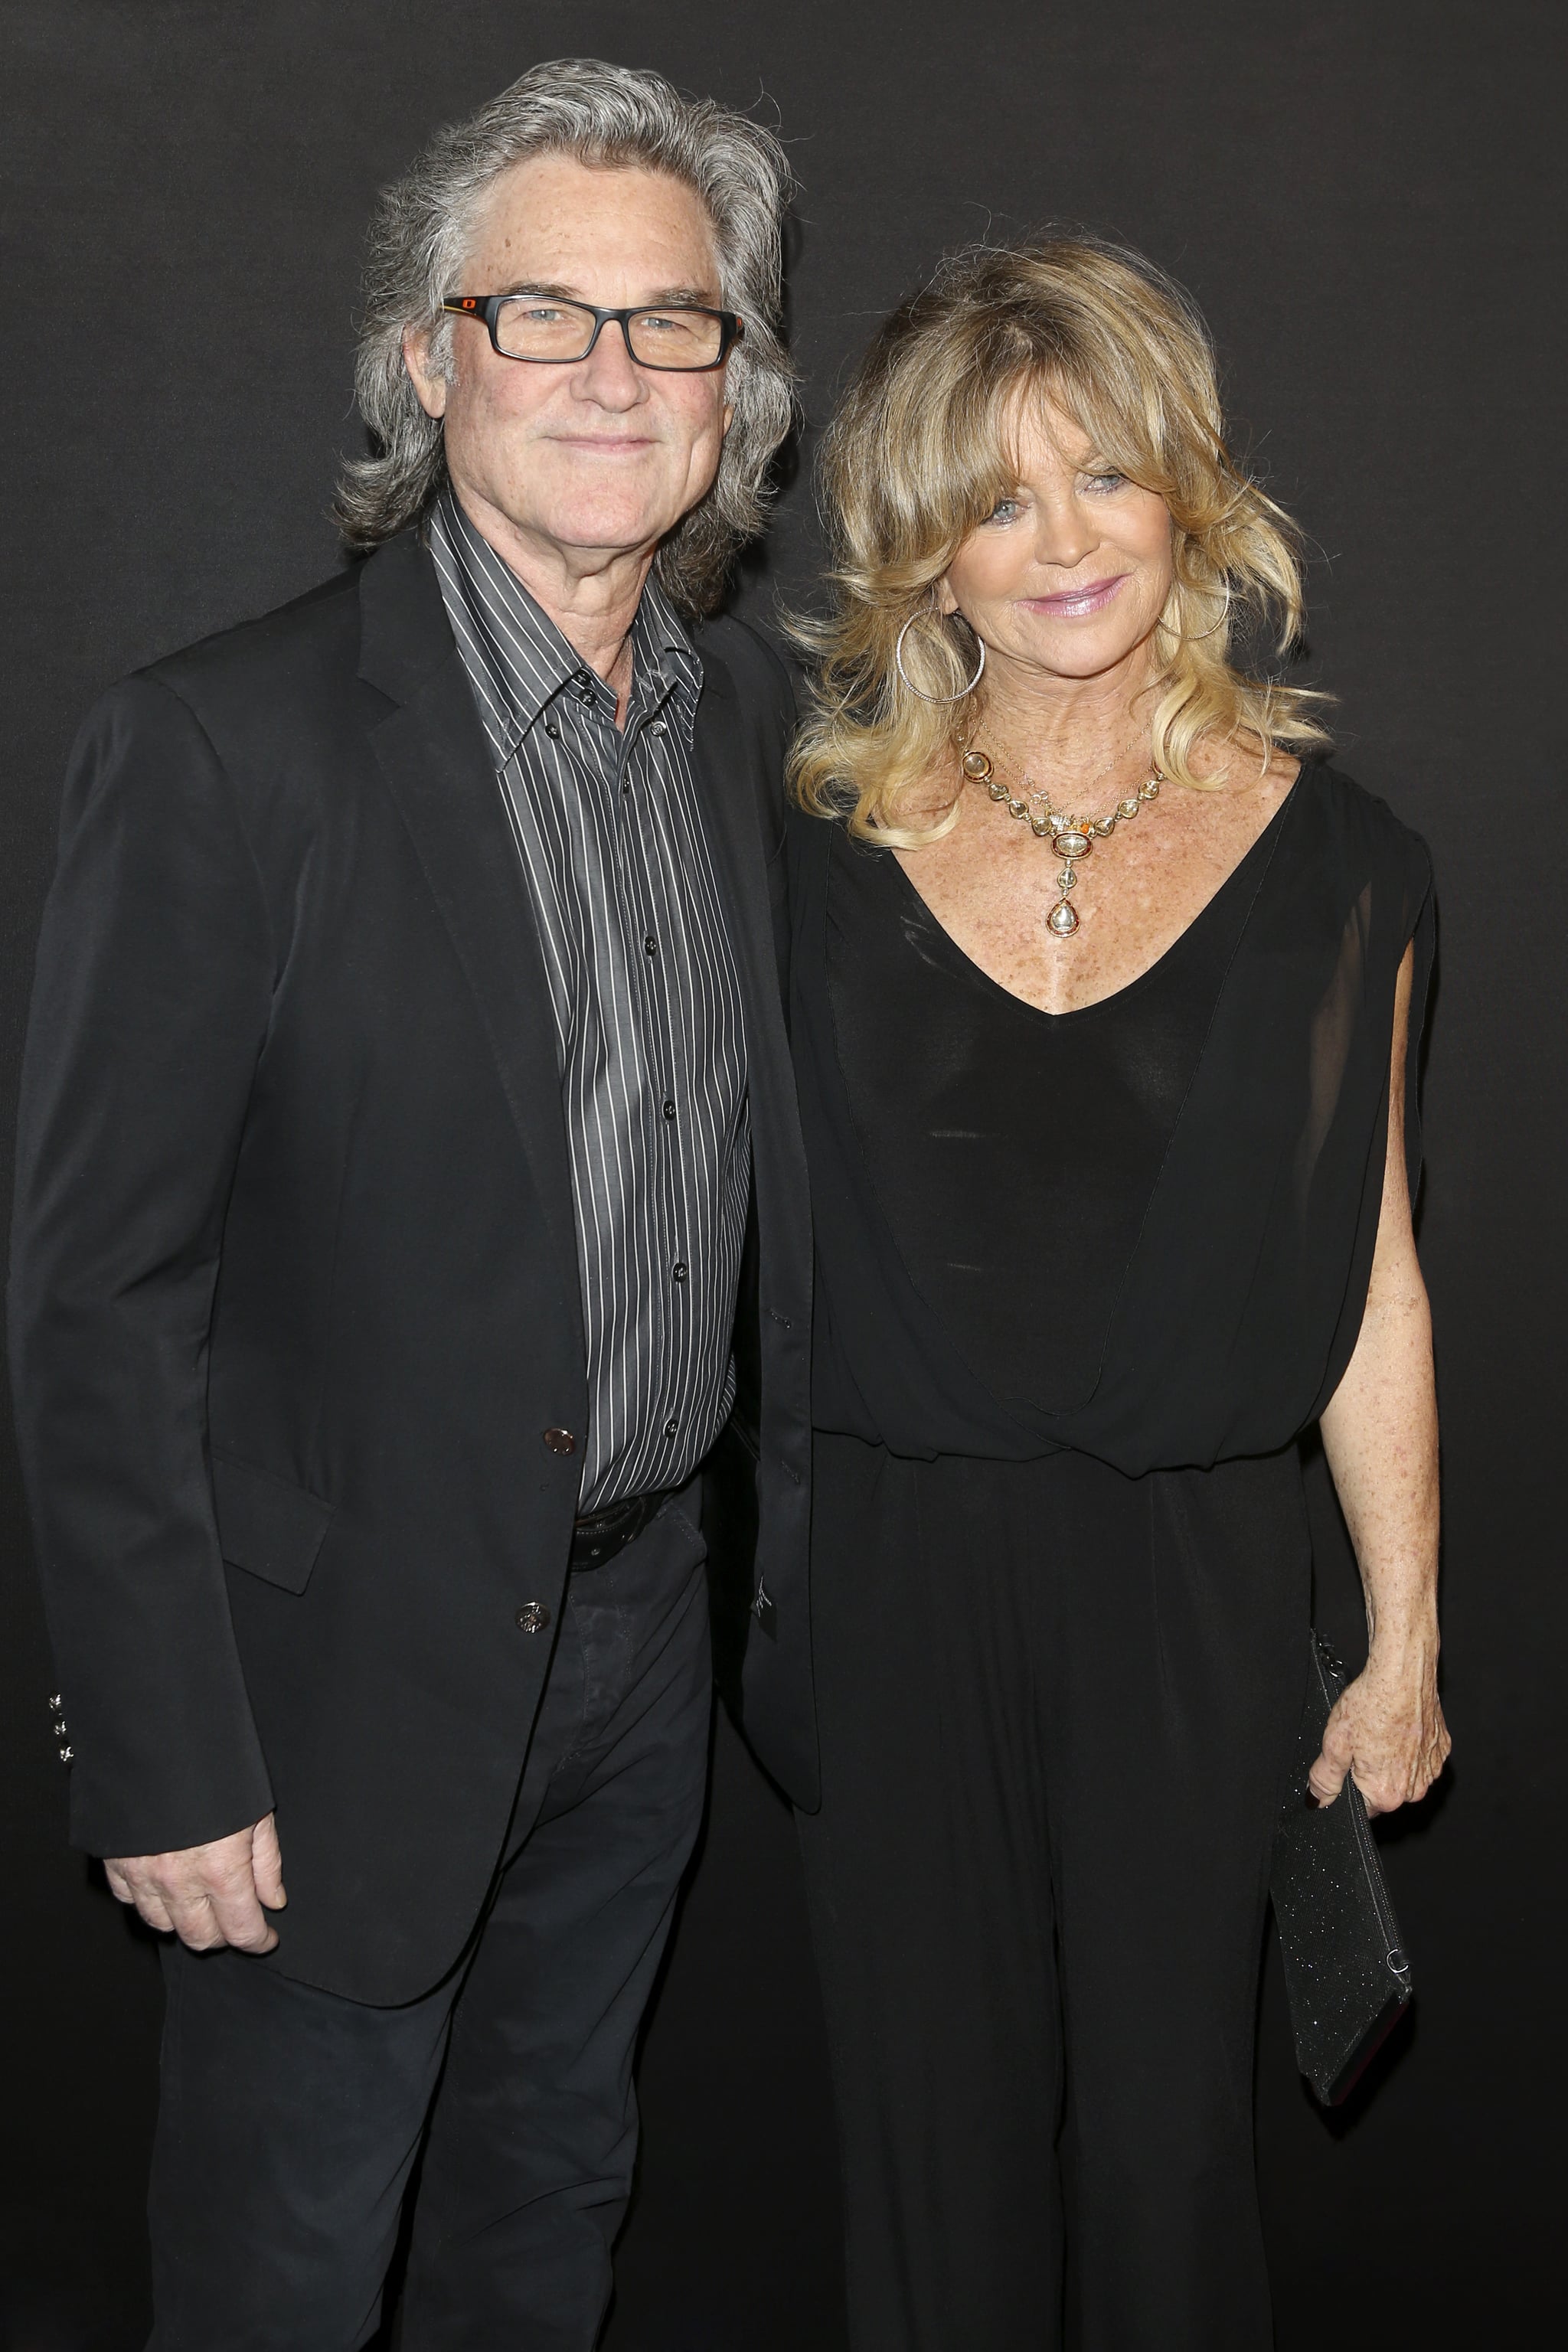 BEVERLY HILLS, CA - FEBRUARY 28: (EDITORS NOTE: Image has been digitally retouched) Kurt Russell and Goldie Hawn attend the WCRF's 'An Unforgettable Evening' at the Beverly Wilshire Four Seasons Hotel on February 28, 2019 in Beverly Hills, California.  (Photo by Kurt Krieger/Corbis via Getty Images)